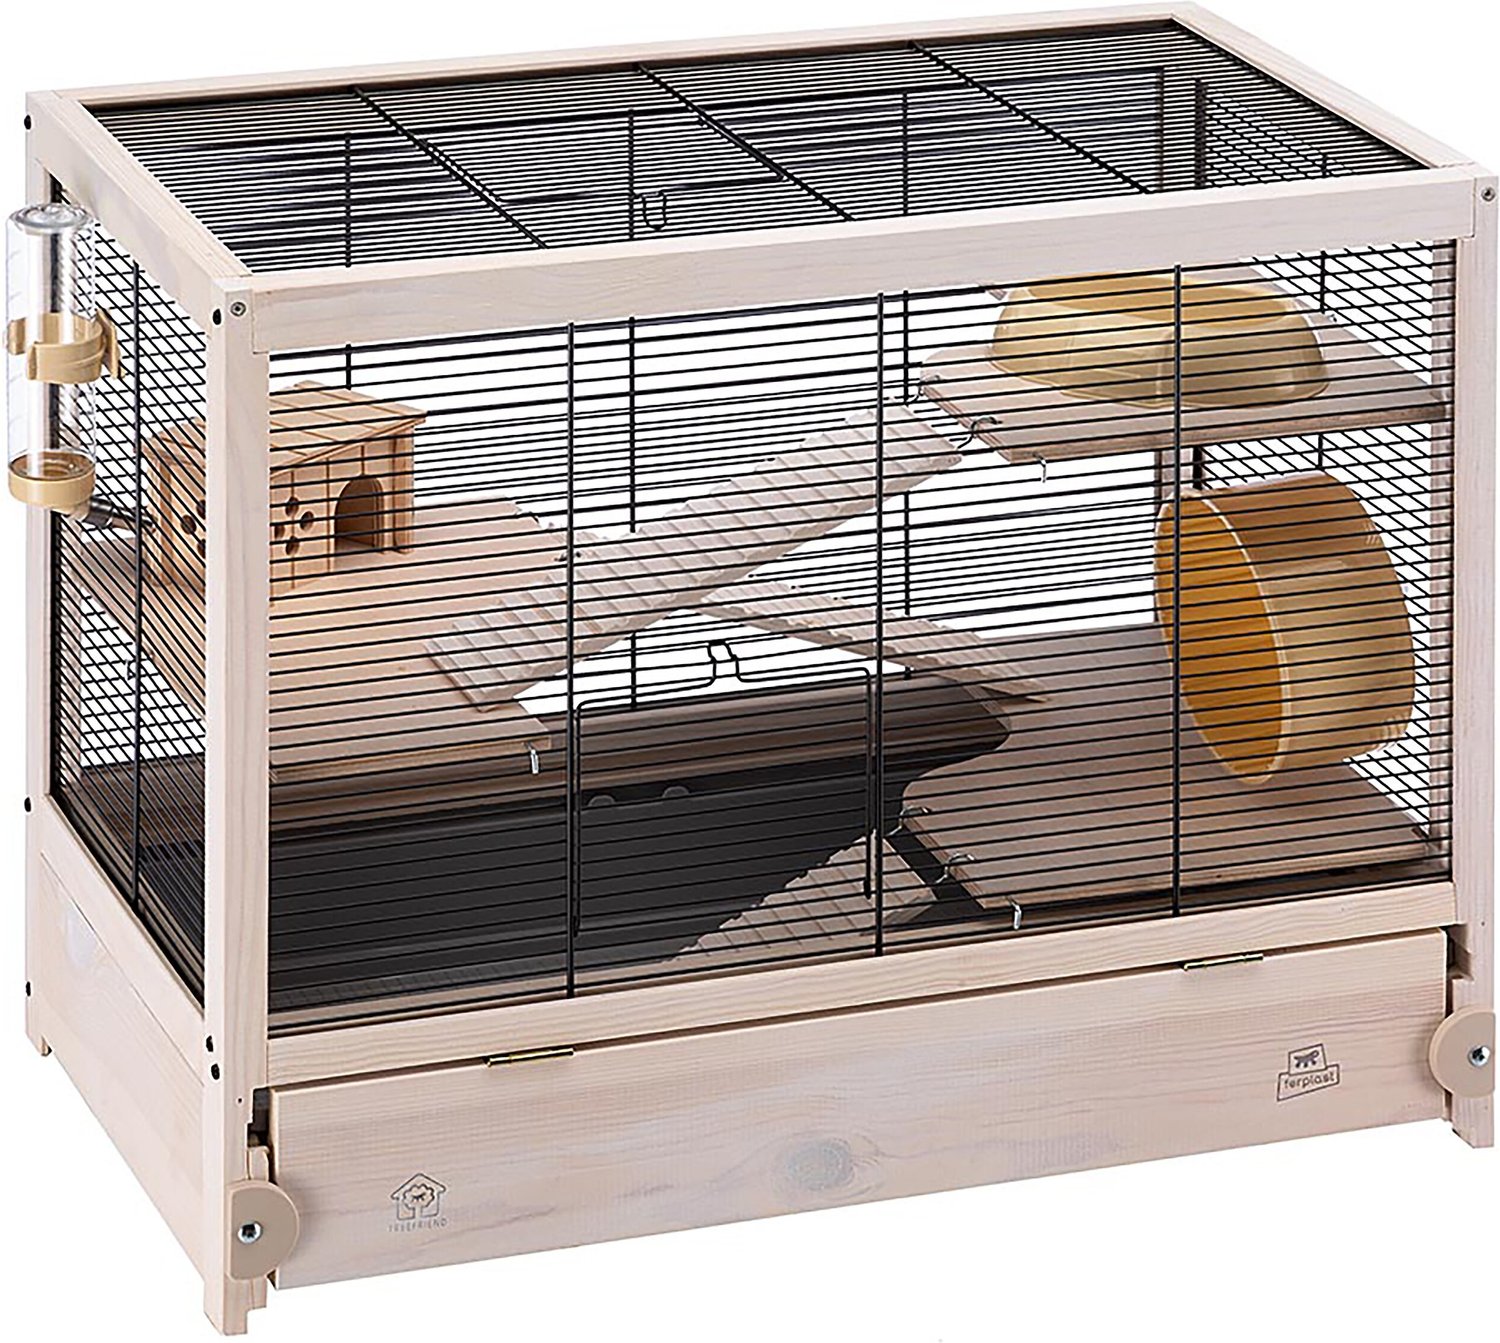 24 by 12 inch hamster cage